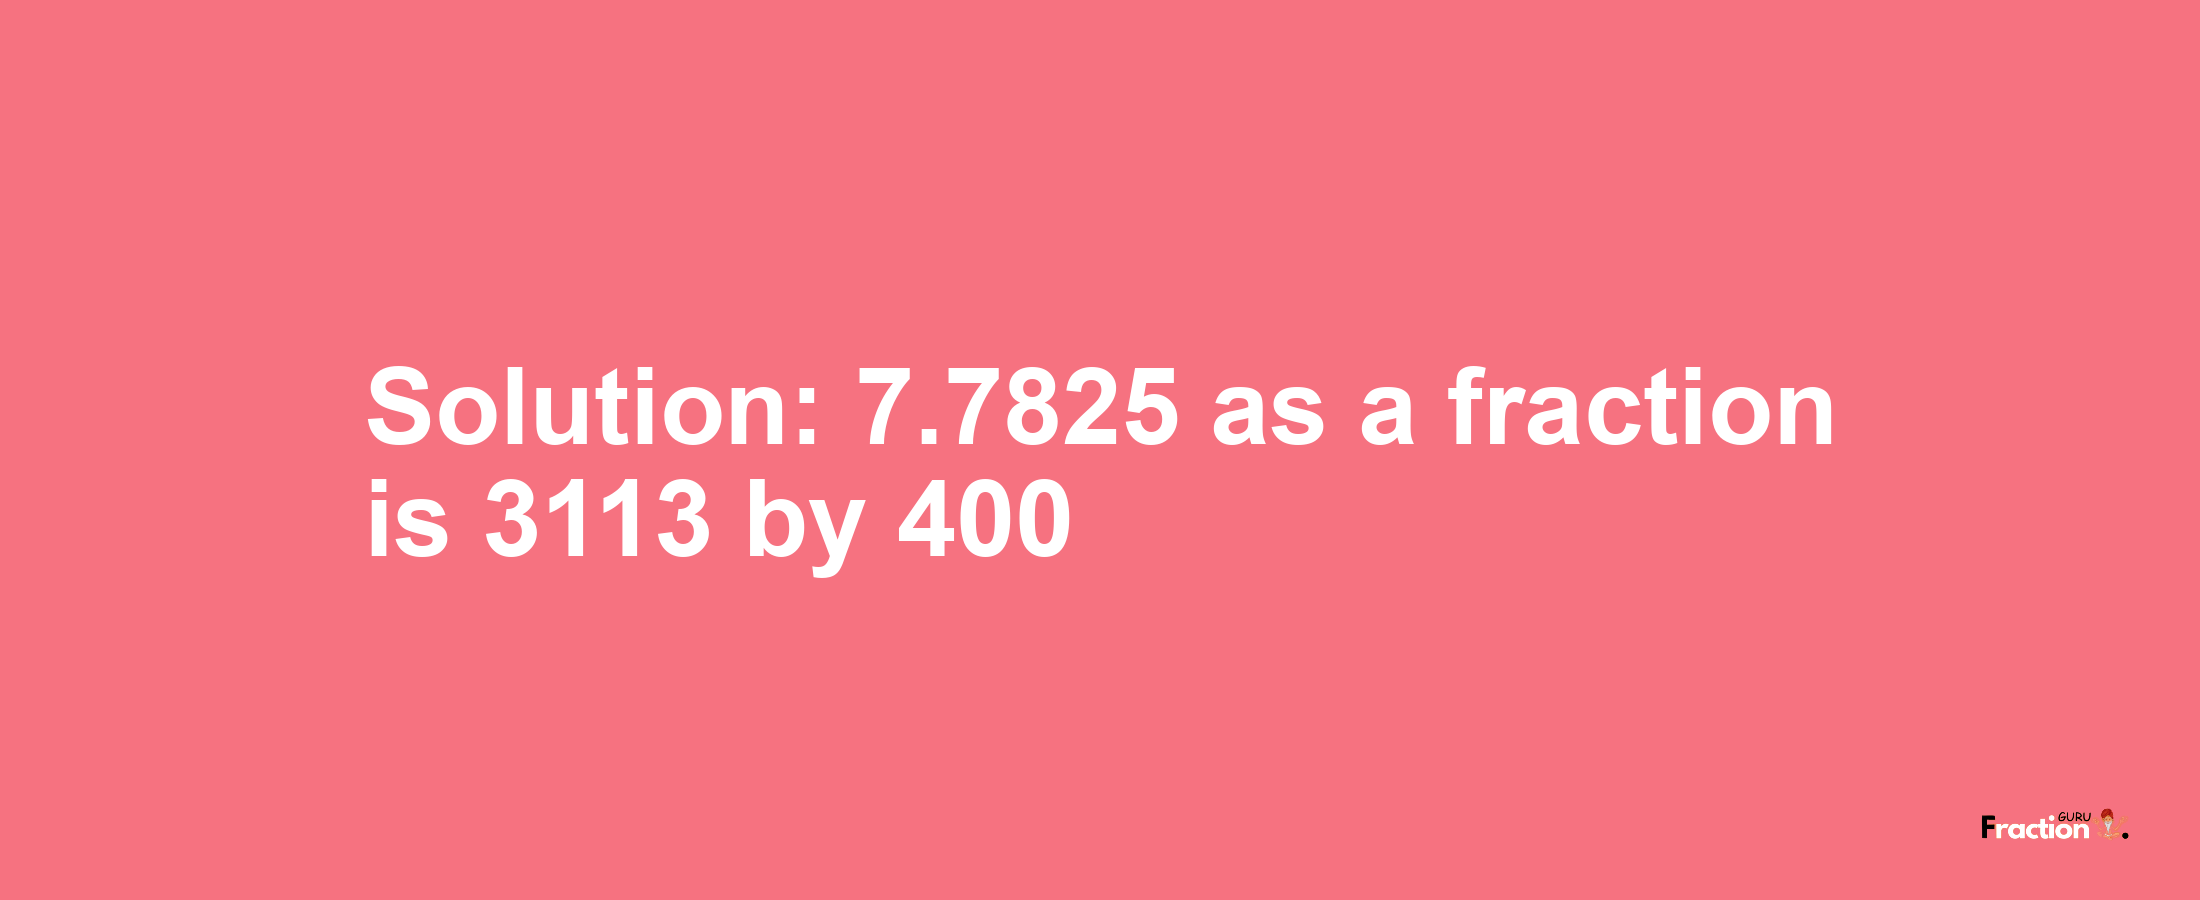 Solution:7.7825 as a fraction is 3113/400